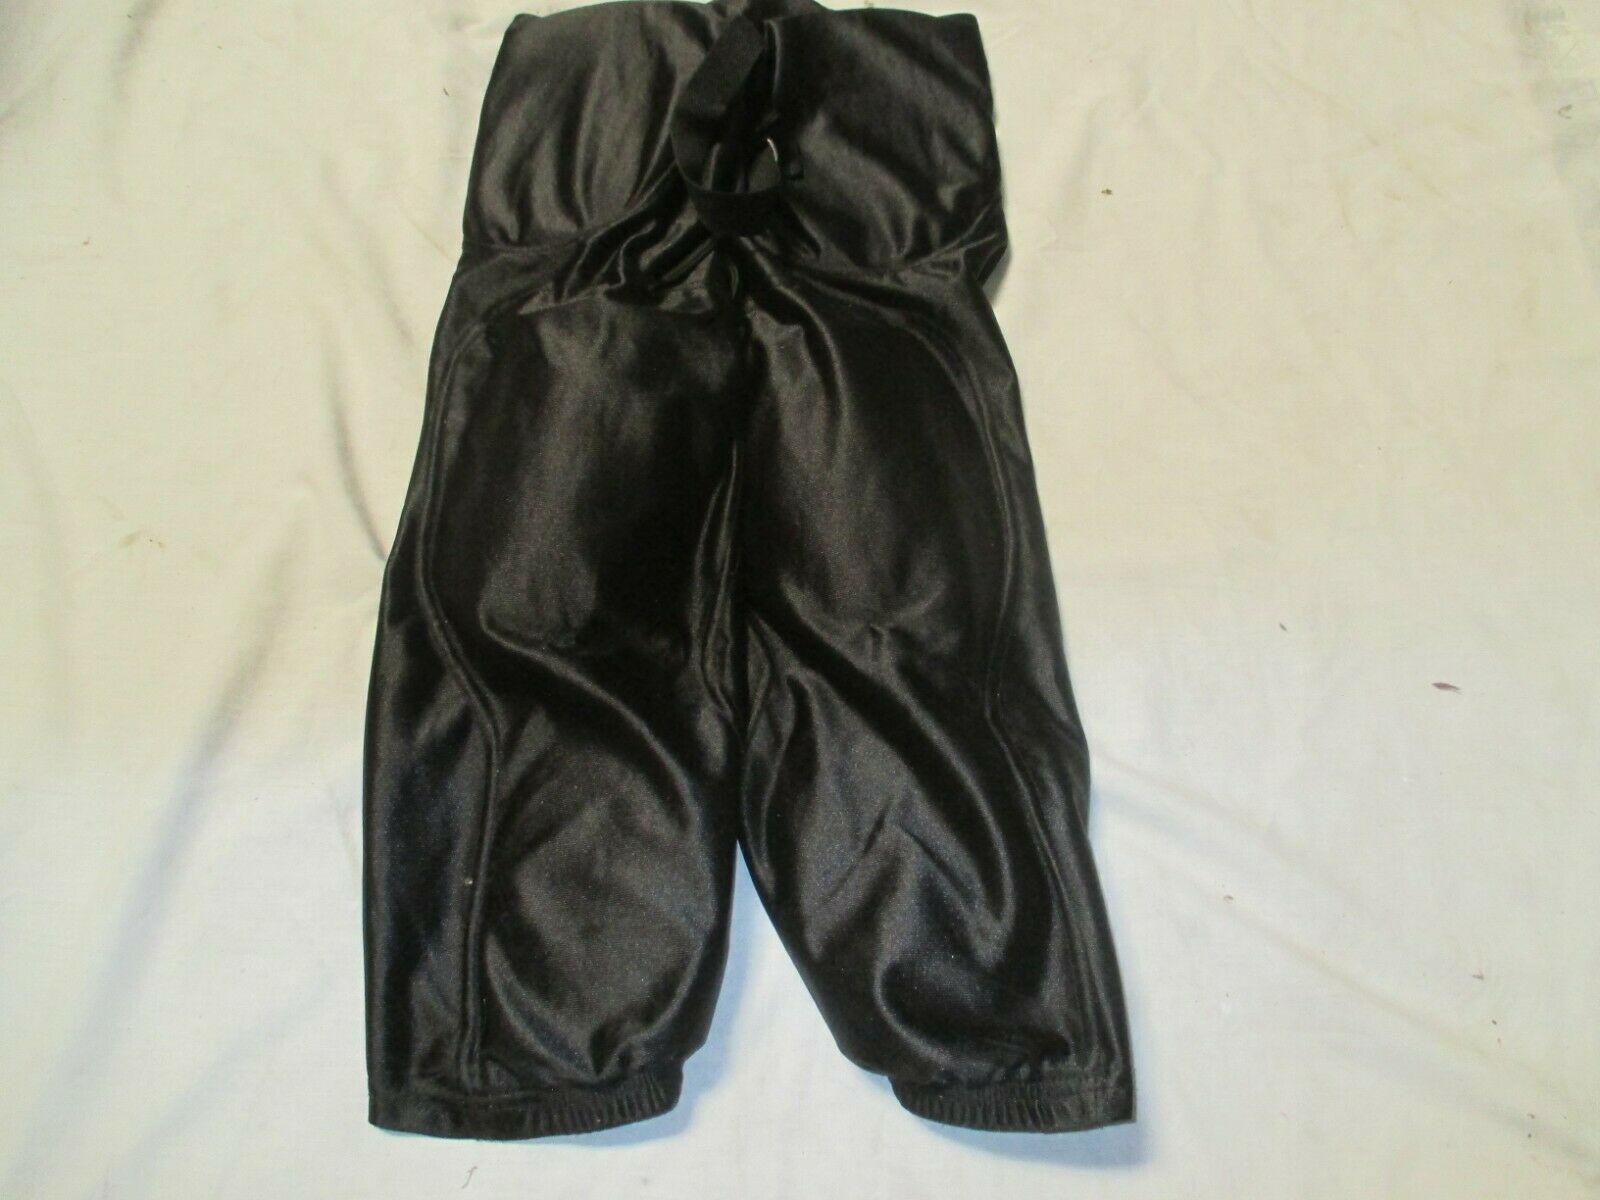 TEAMWORK 3310 BLACK YOUTH INTEGRATED PADDED FOOTBALL PANT (SIZE X-LARGE)